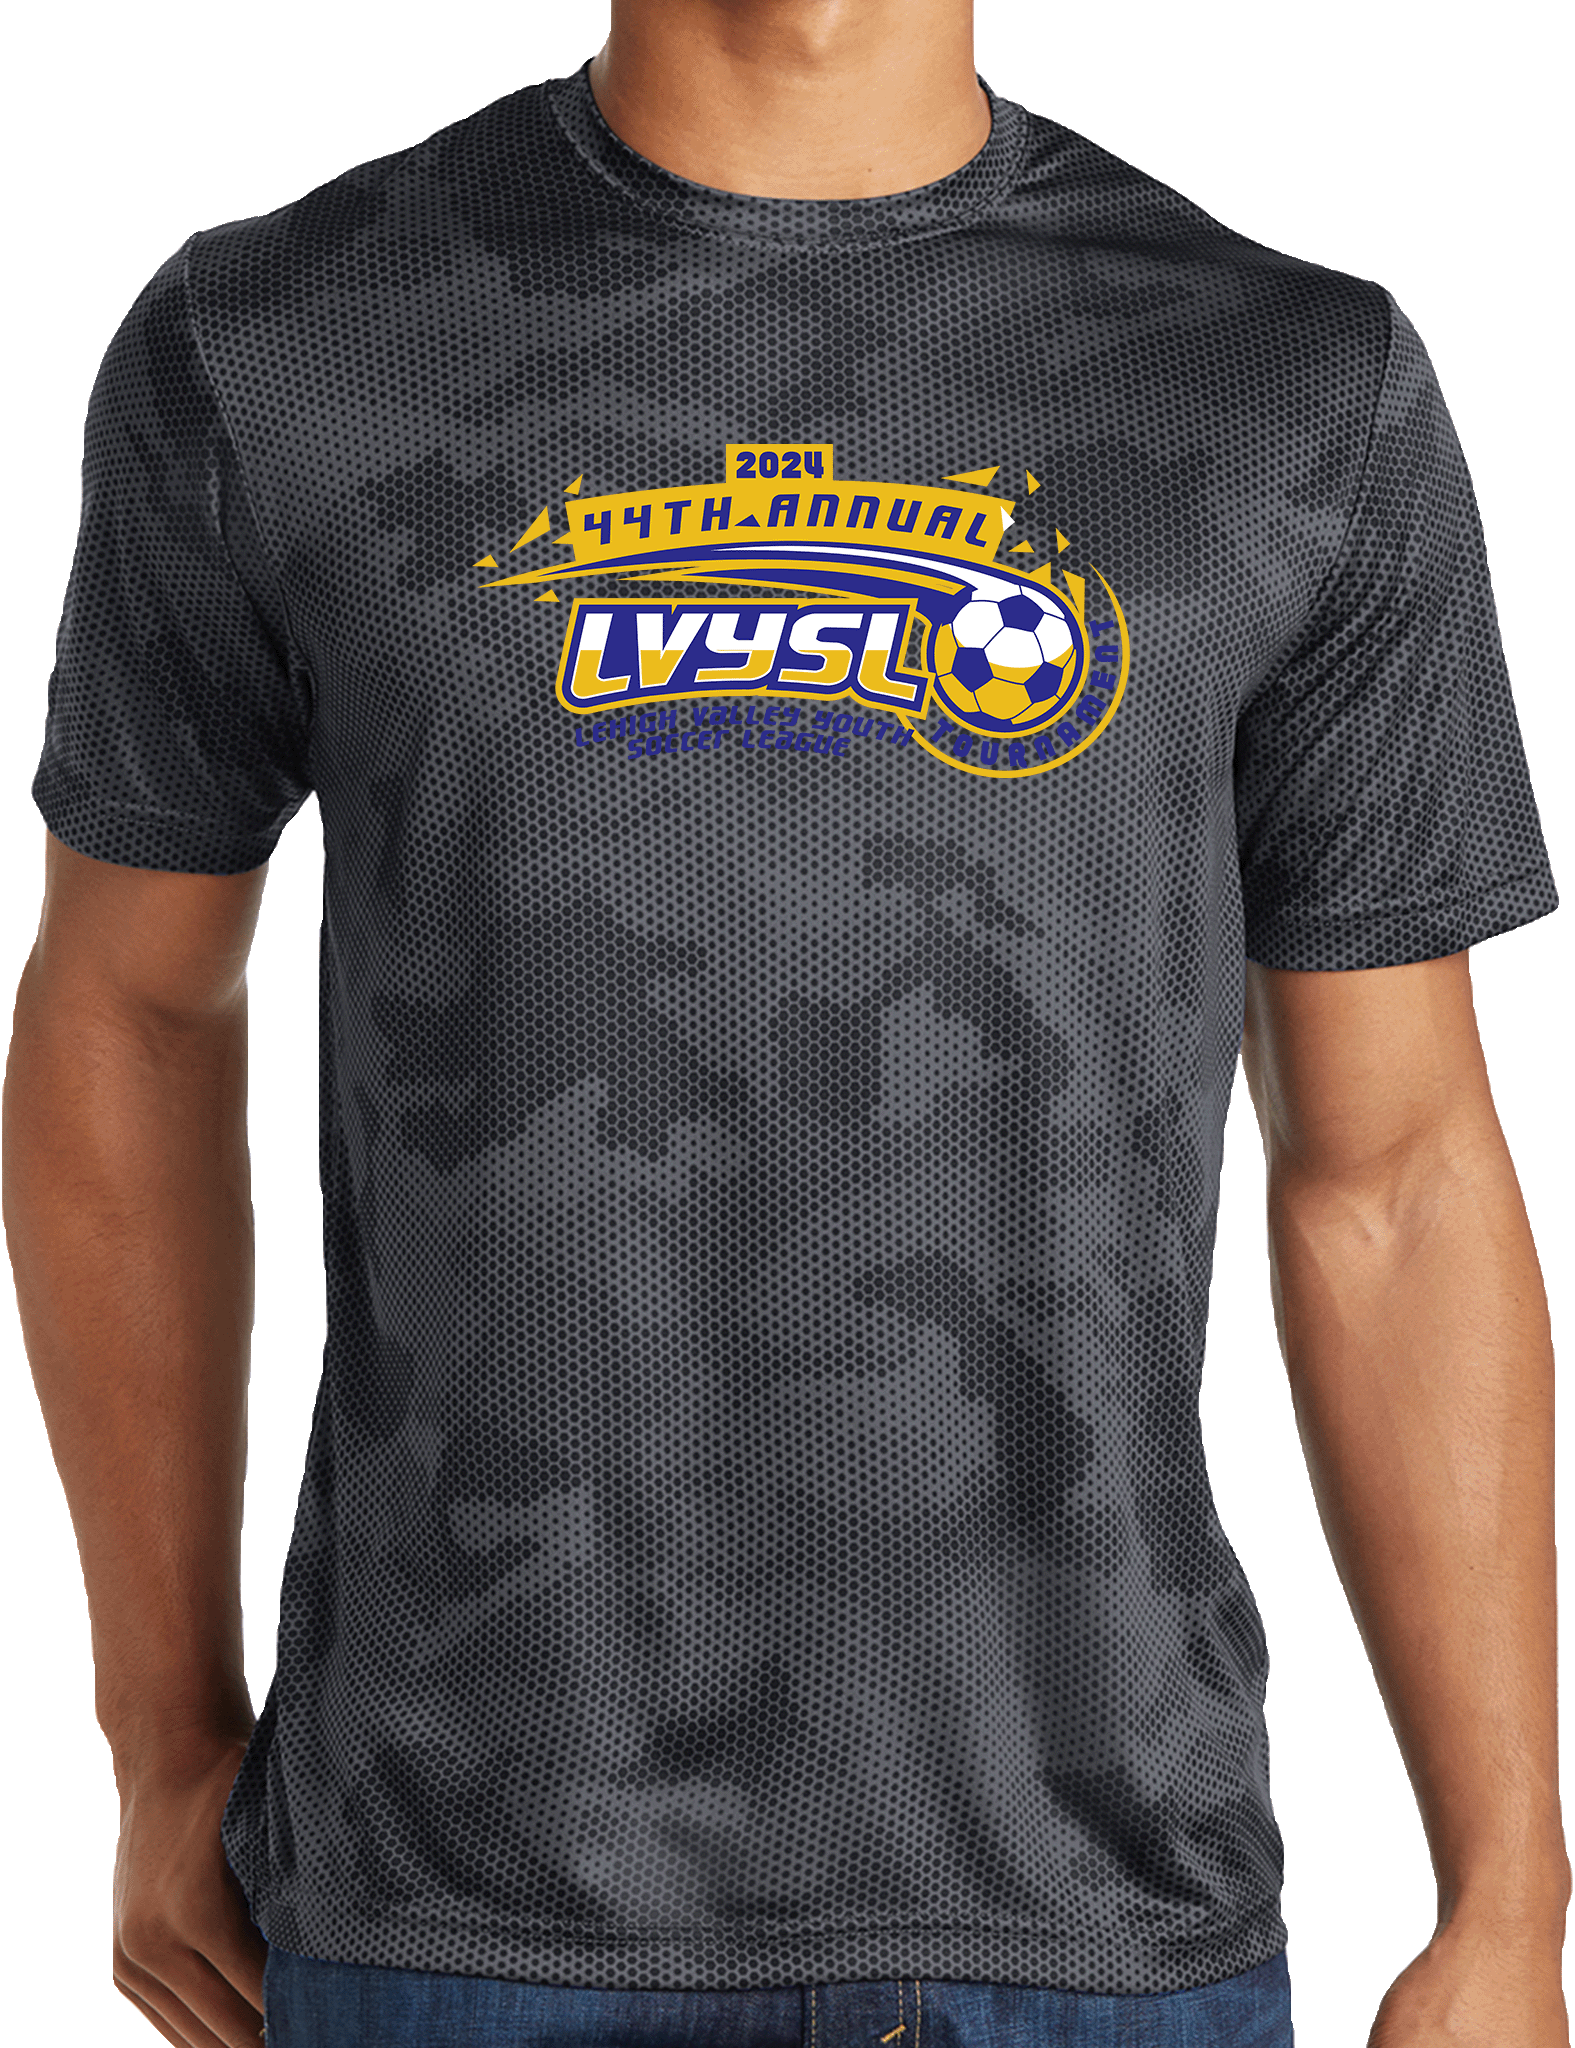 Performance Shirts - 2024 44th annual Lehigh Valley Youth Soccer League Tournament